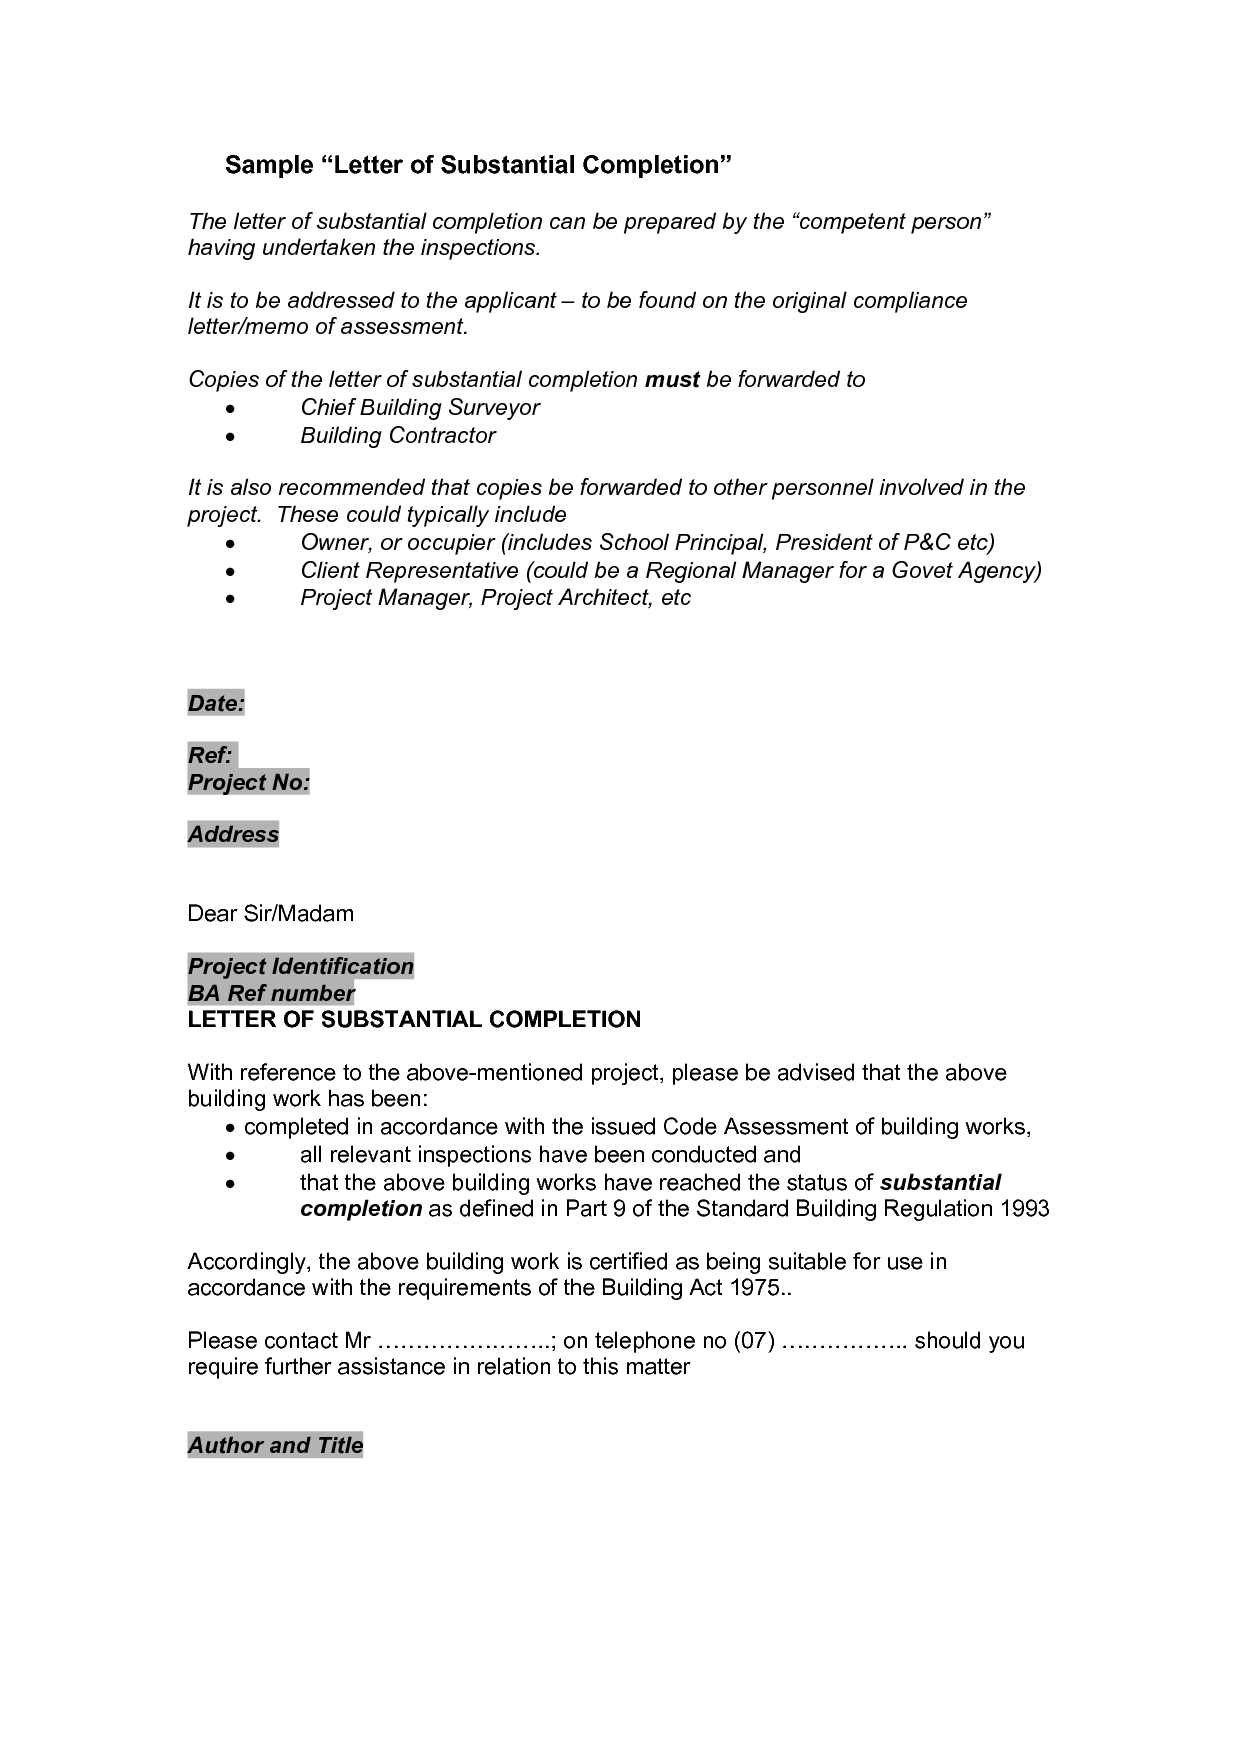 Certification Certificate Completion Construction Letter With Regard To Certificate Of Substantial Completion Template